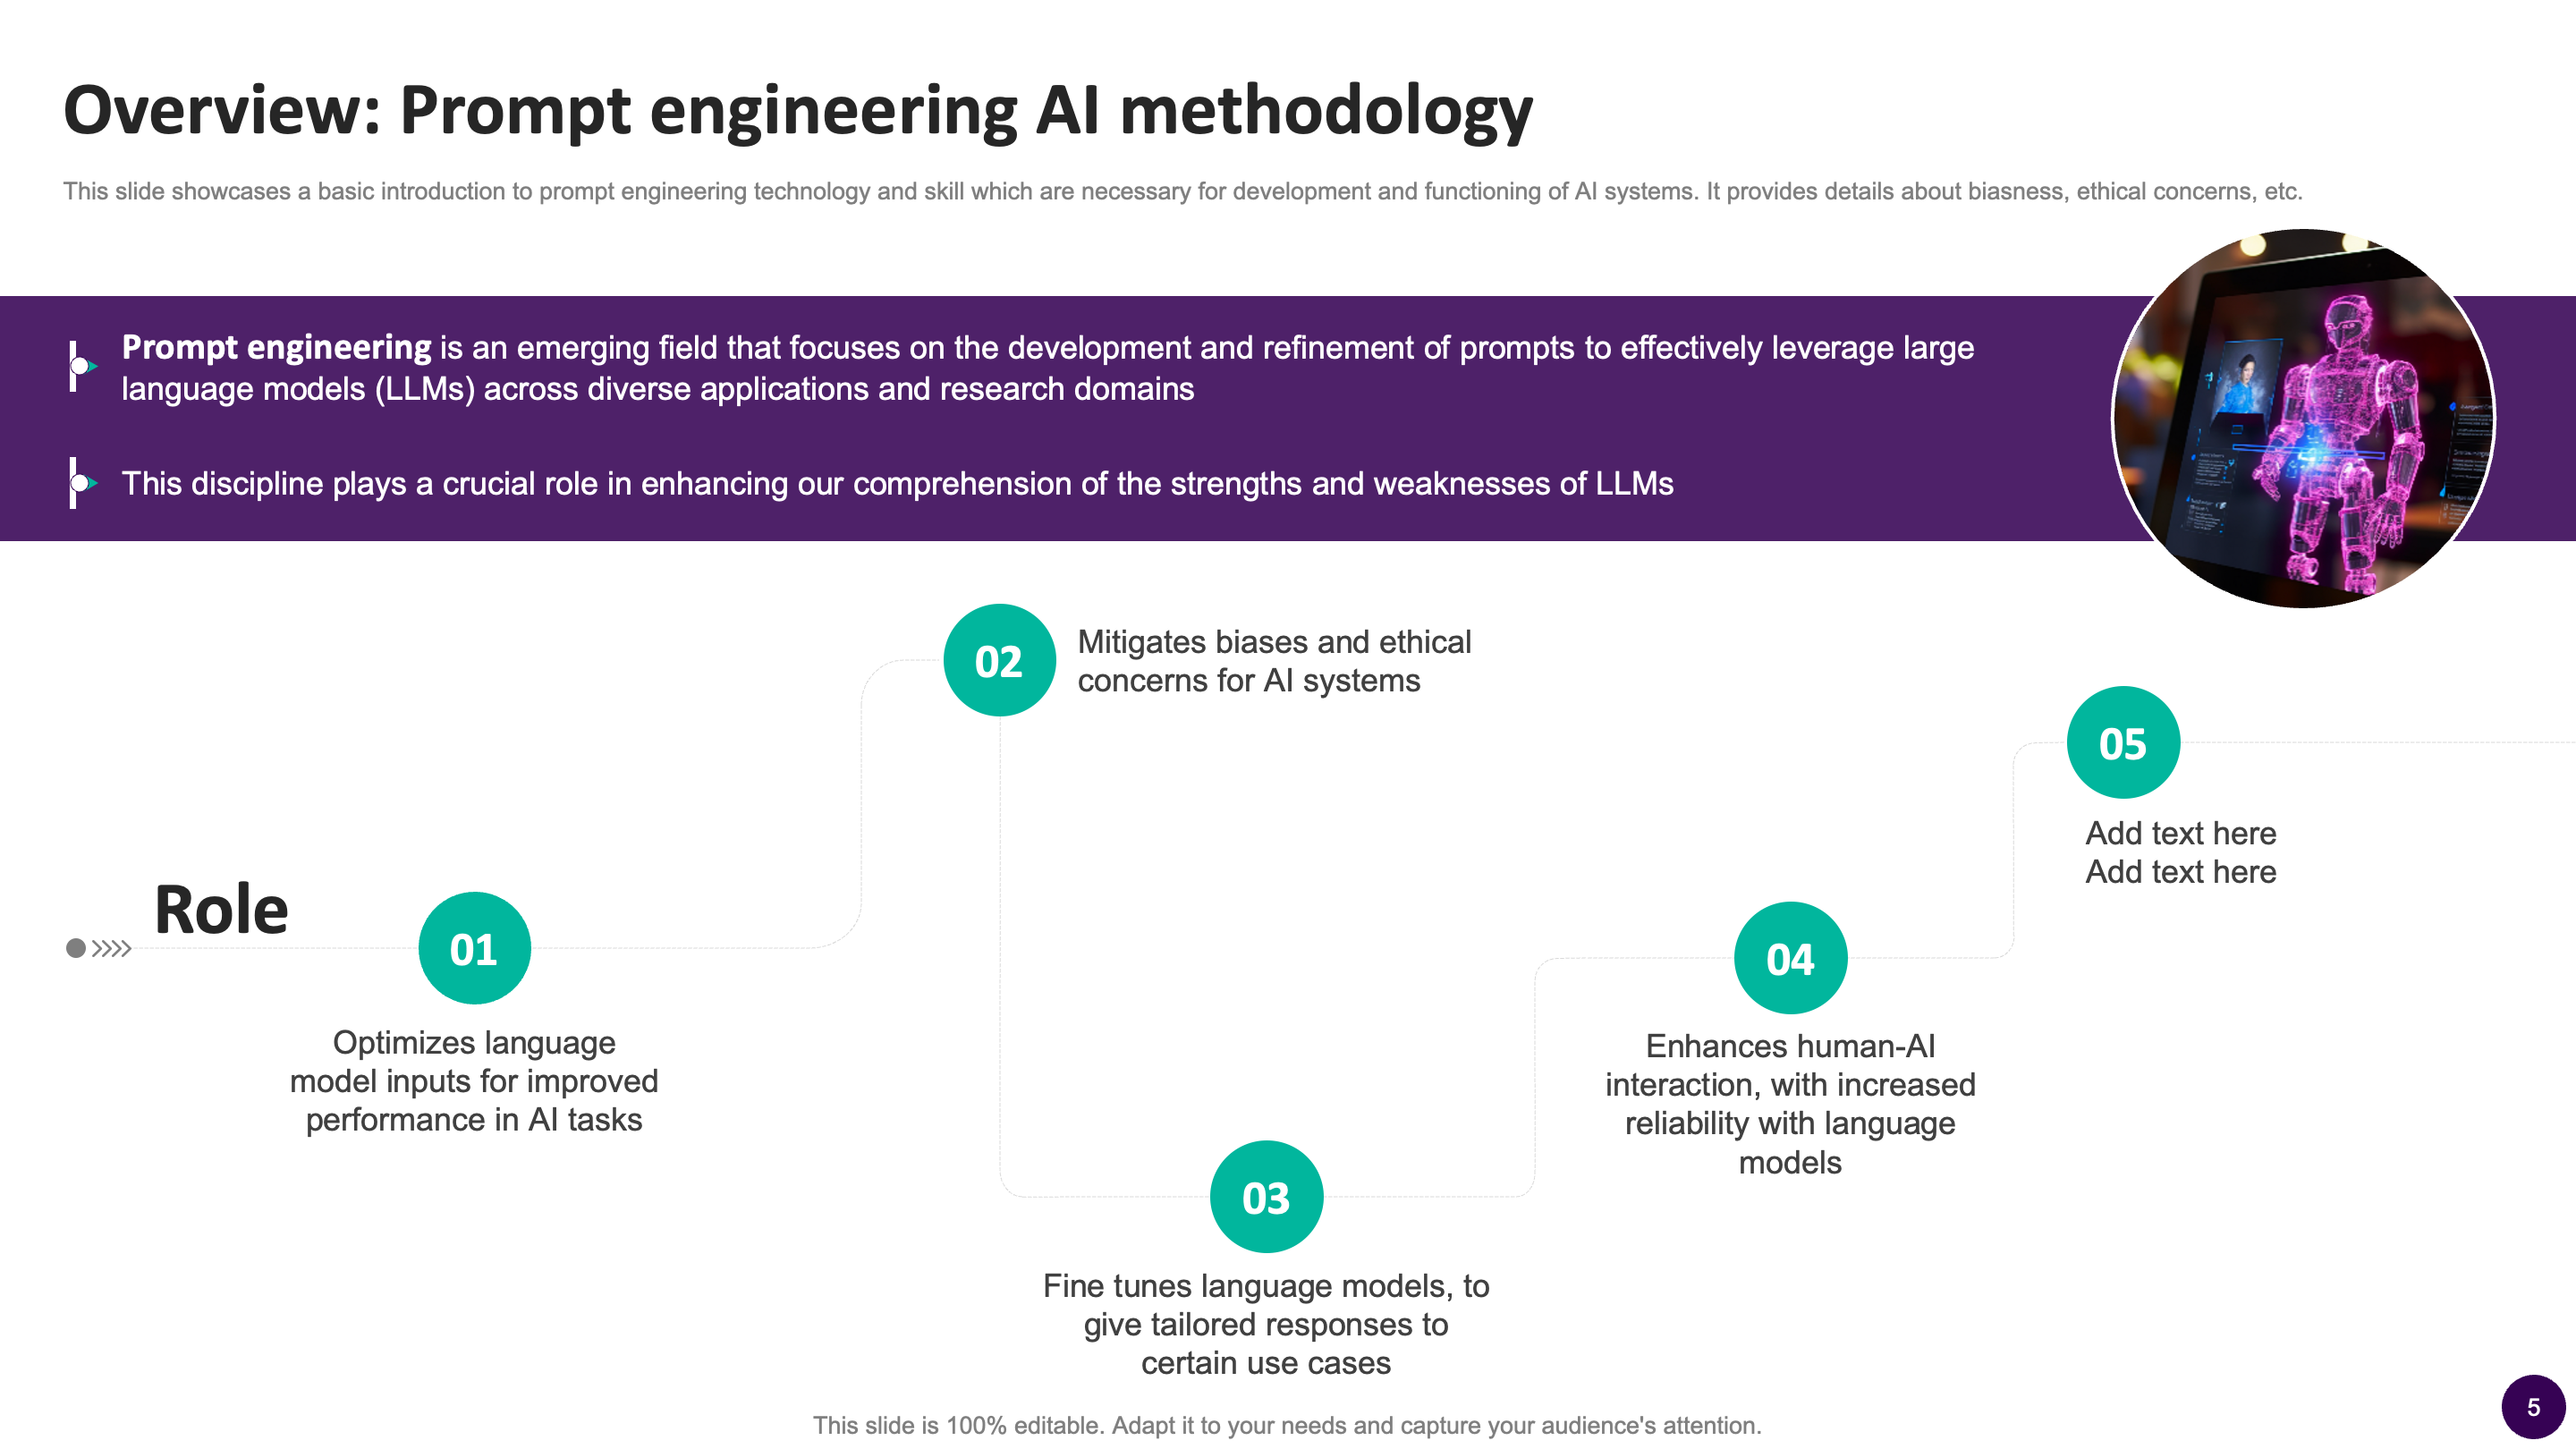 Overview: Prompt Engineering AI Methodology